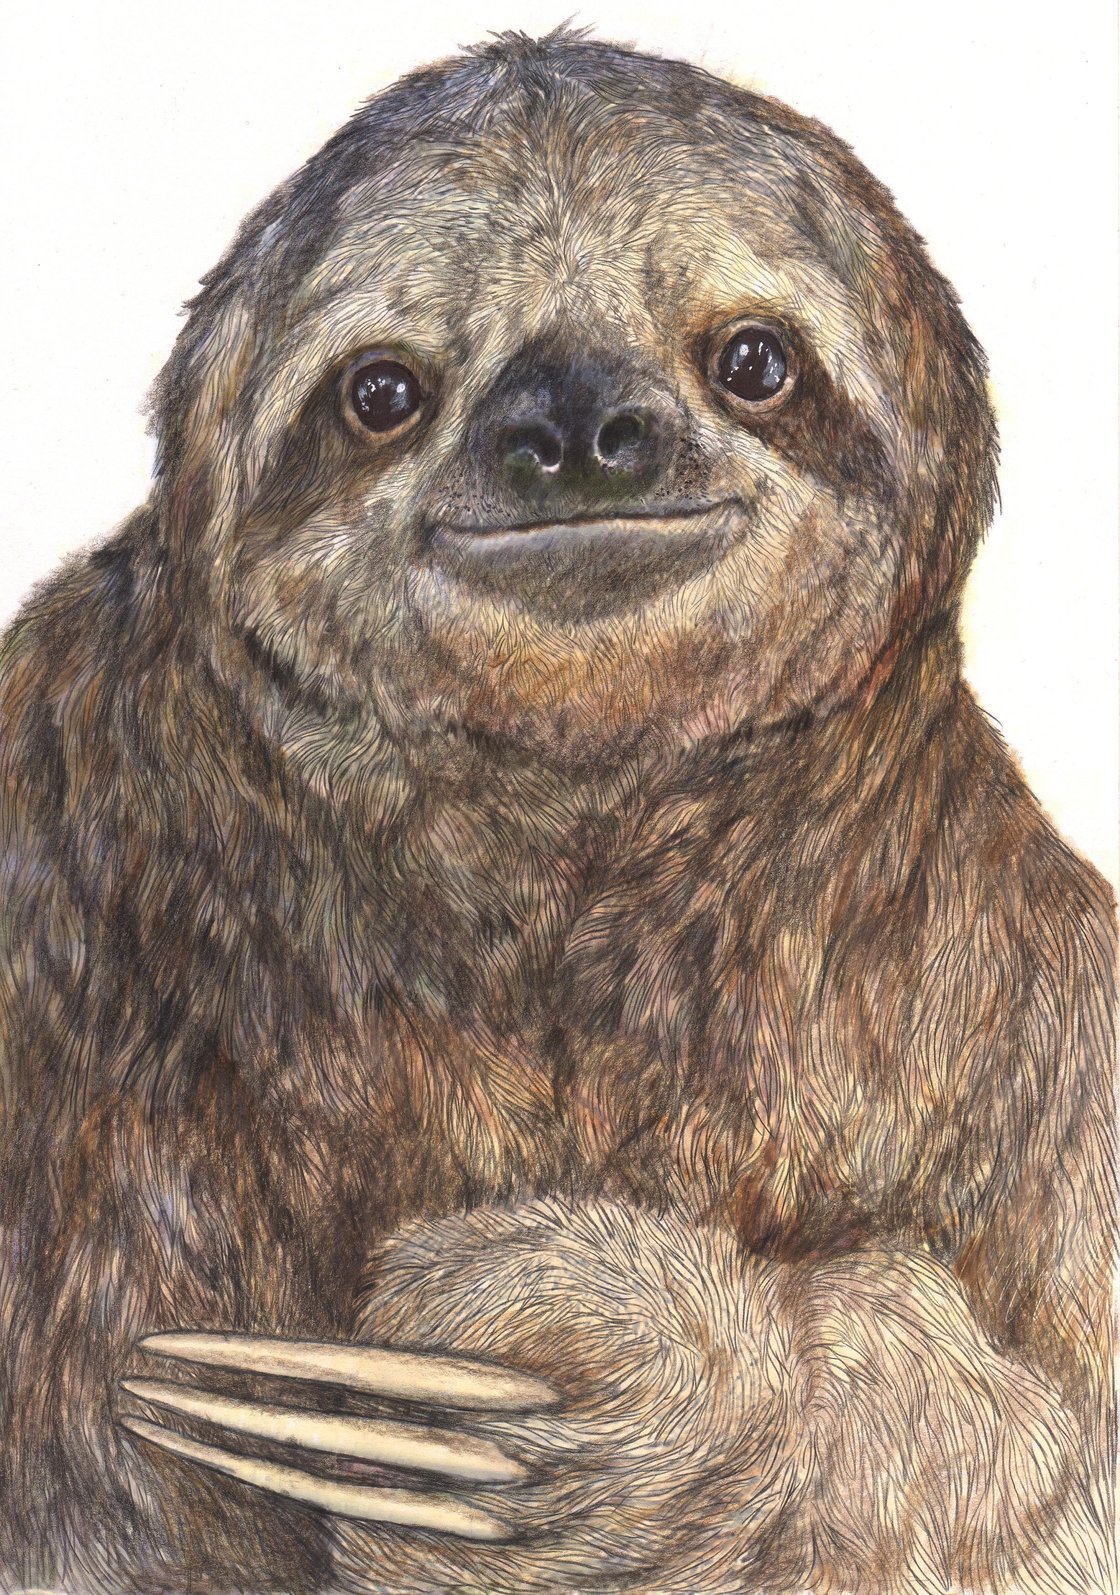 Image of Sloth signed fine art print in mount. Available in three sizes